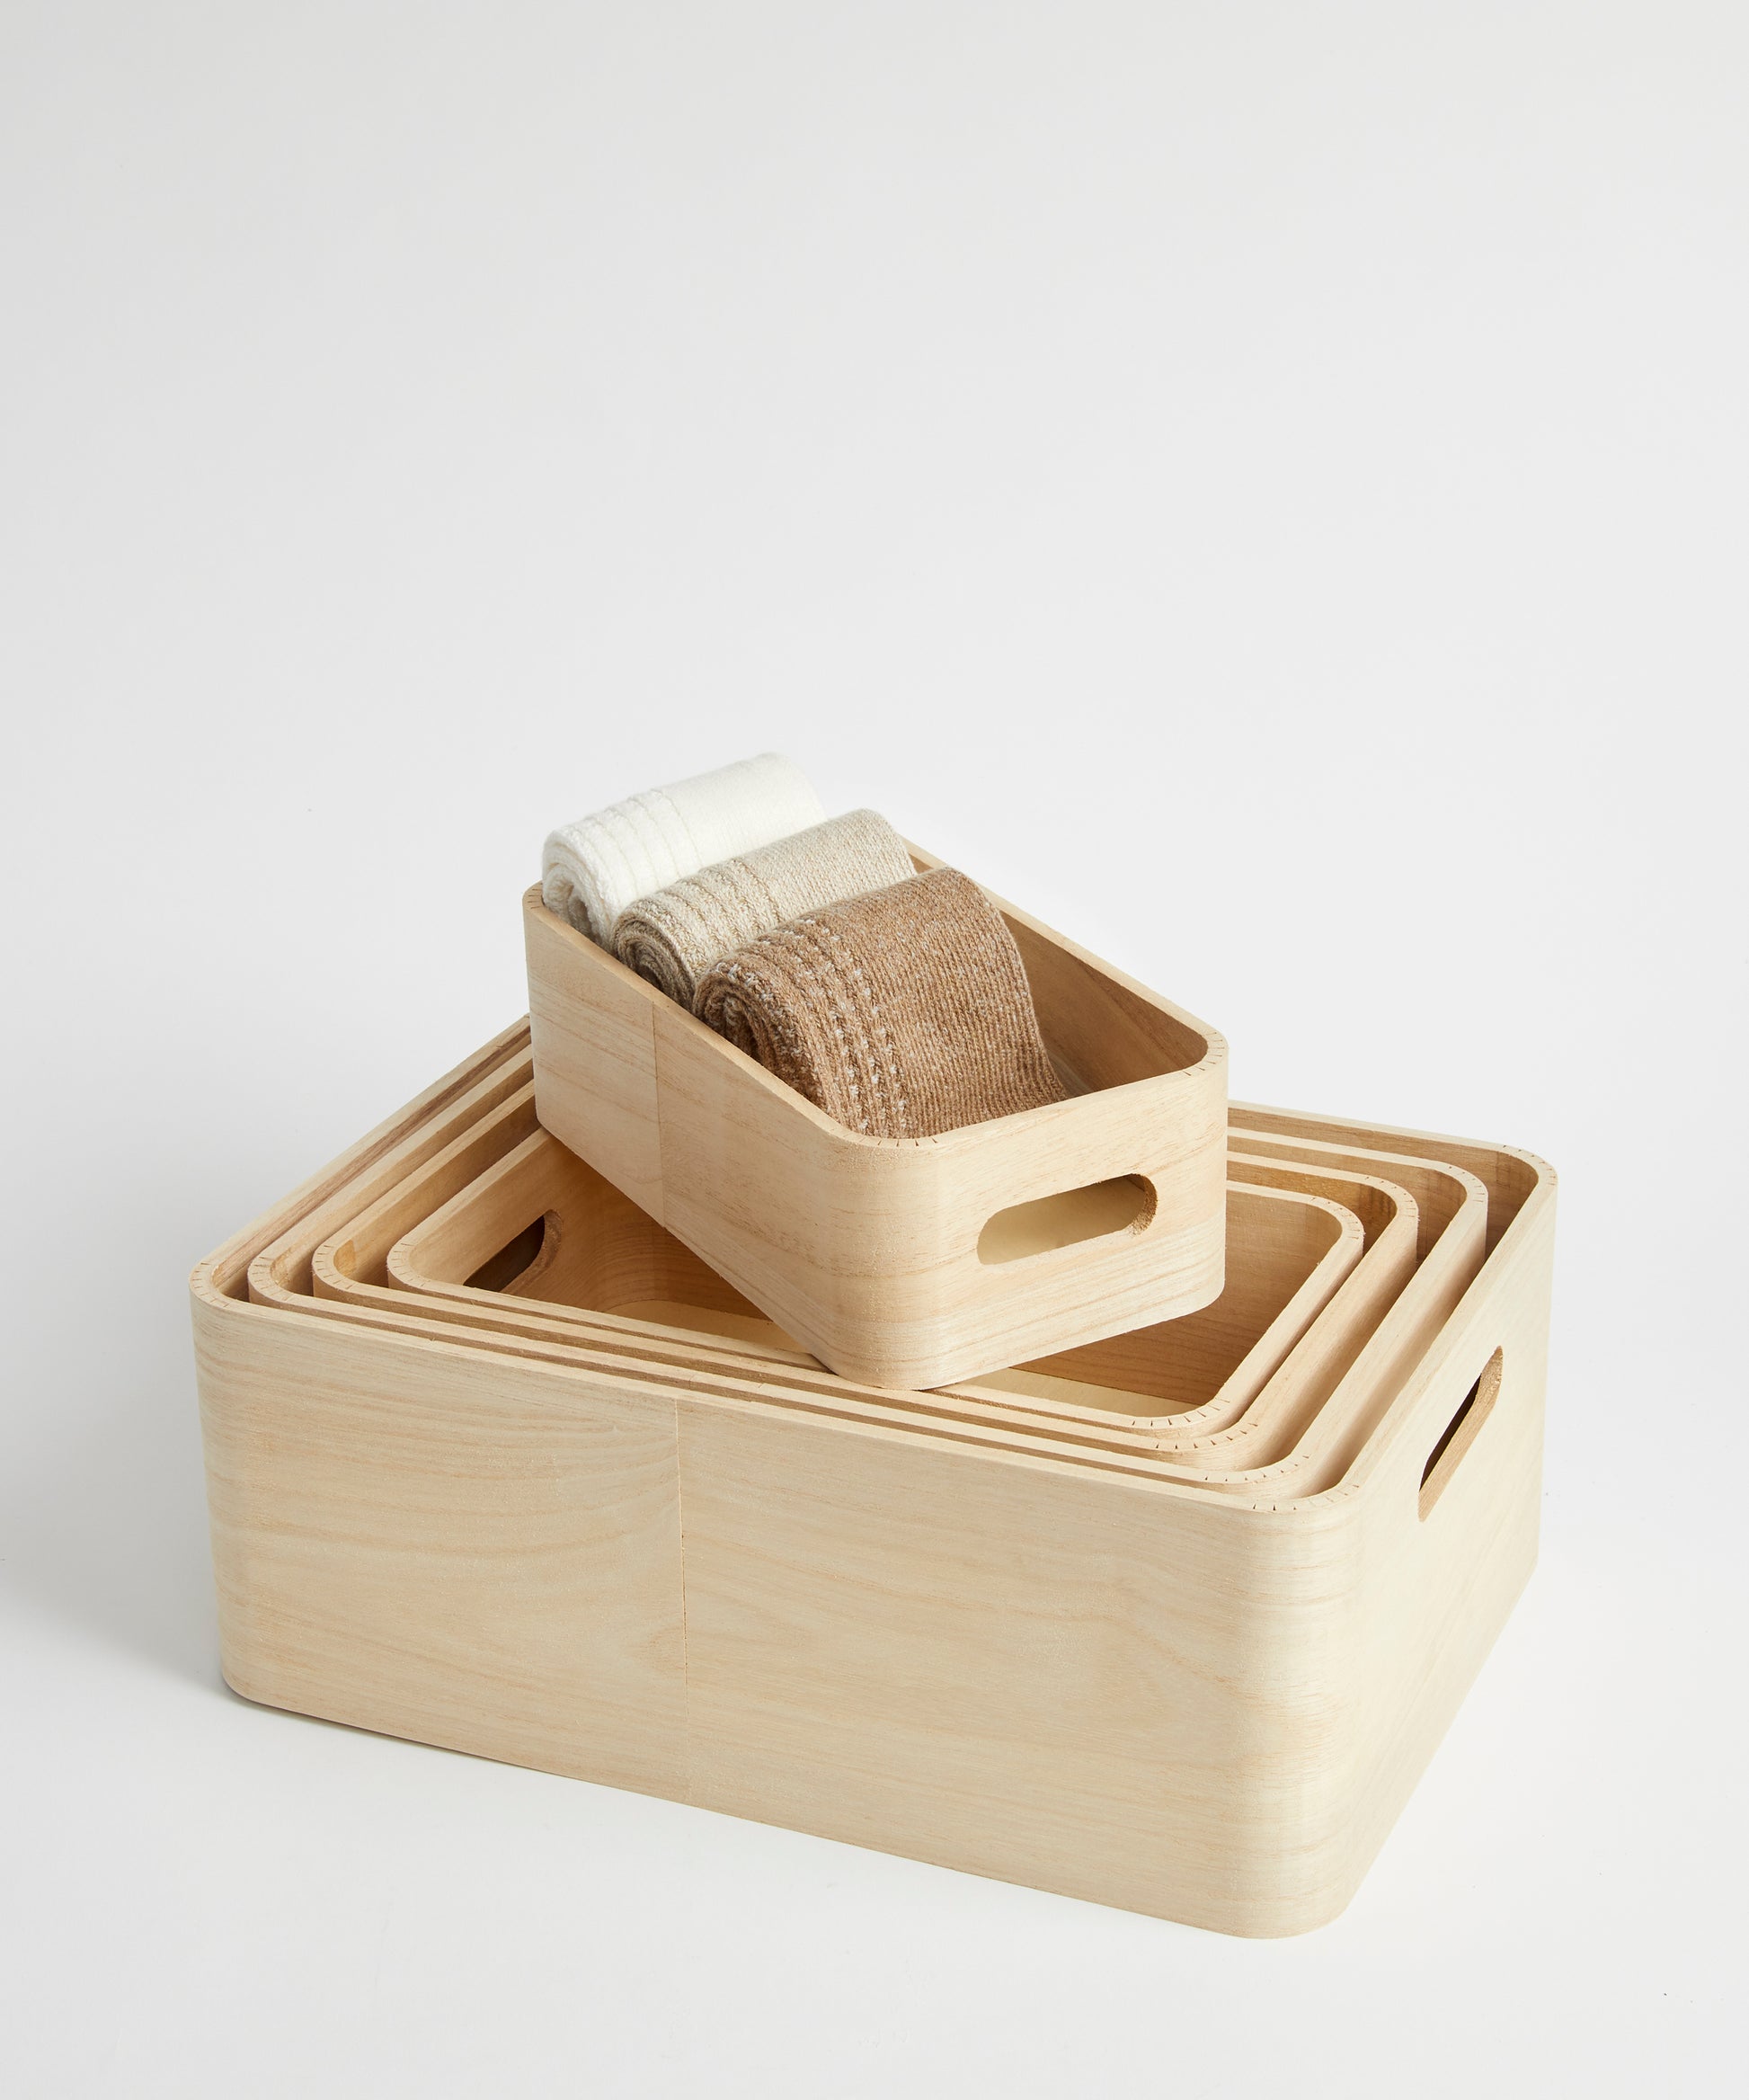 Portable Storage Box with Wooden Handle and Divided Compartments